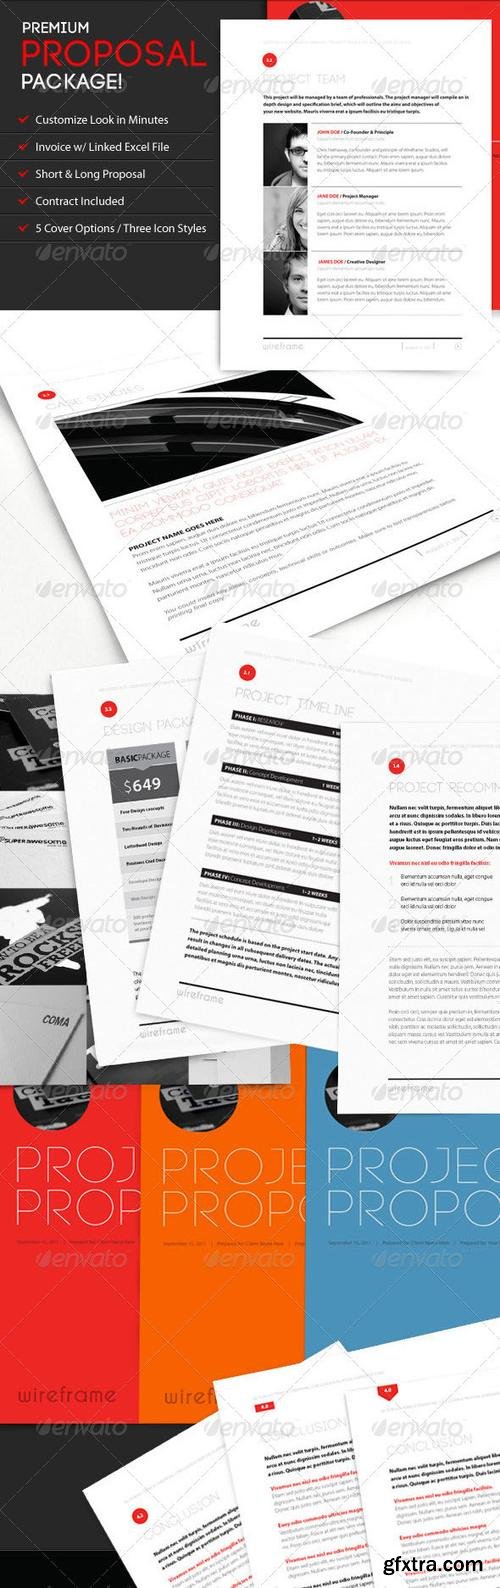 GraphicRiver - Wireframe: Proposal Template w/ Invoice & Contract